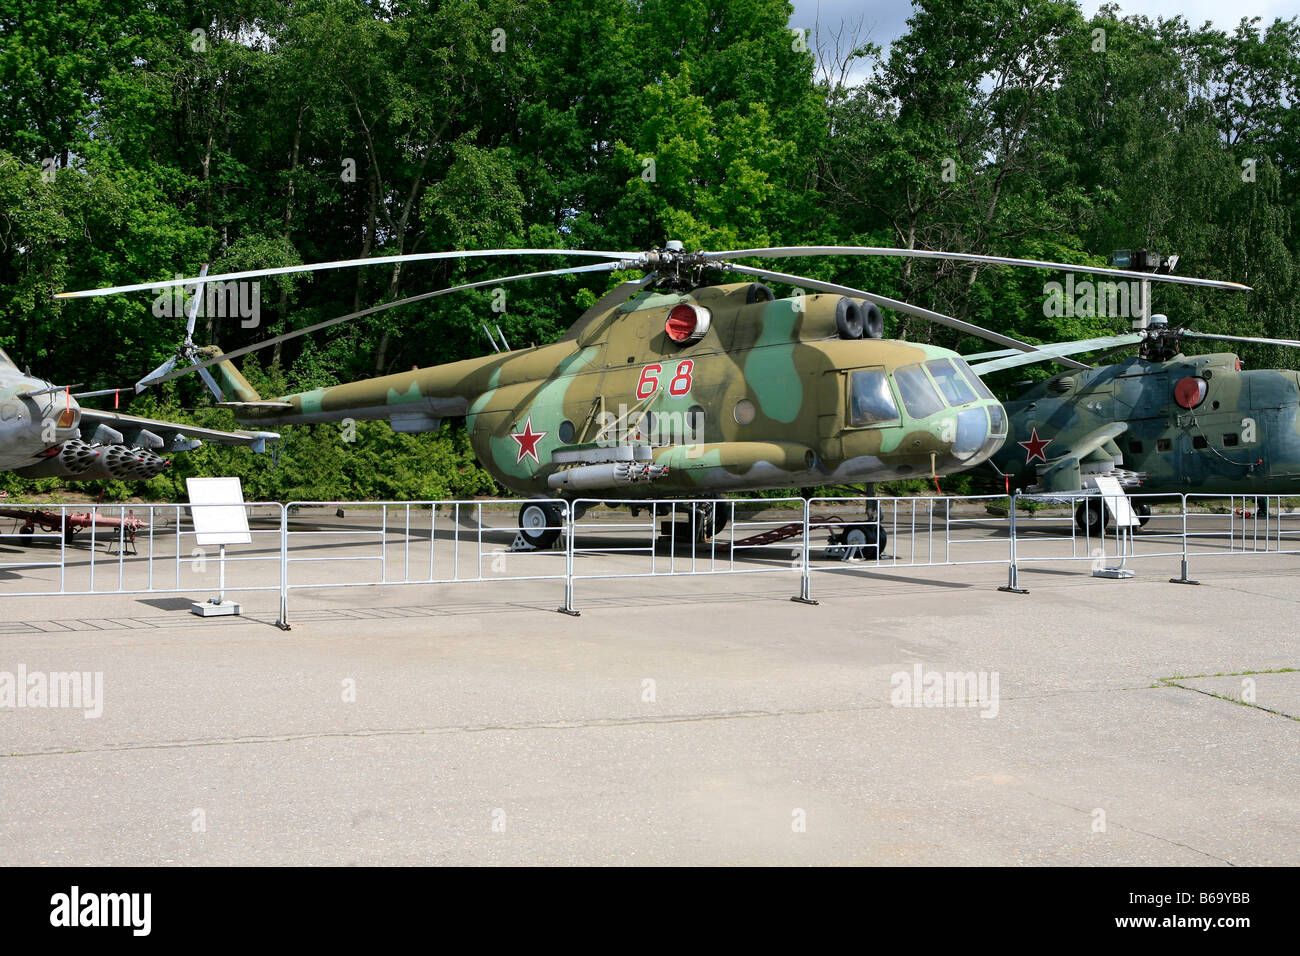 The Mil Mi-24 helicopter gunship (Hind) at Victory Park in Moscow, Russia Stock Photo